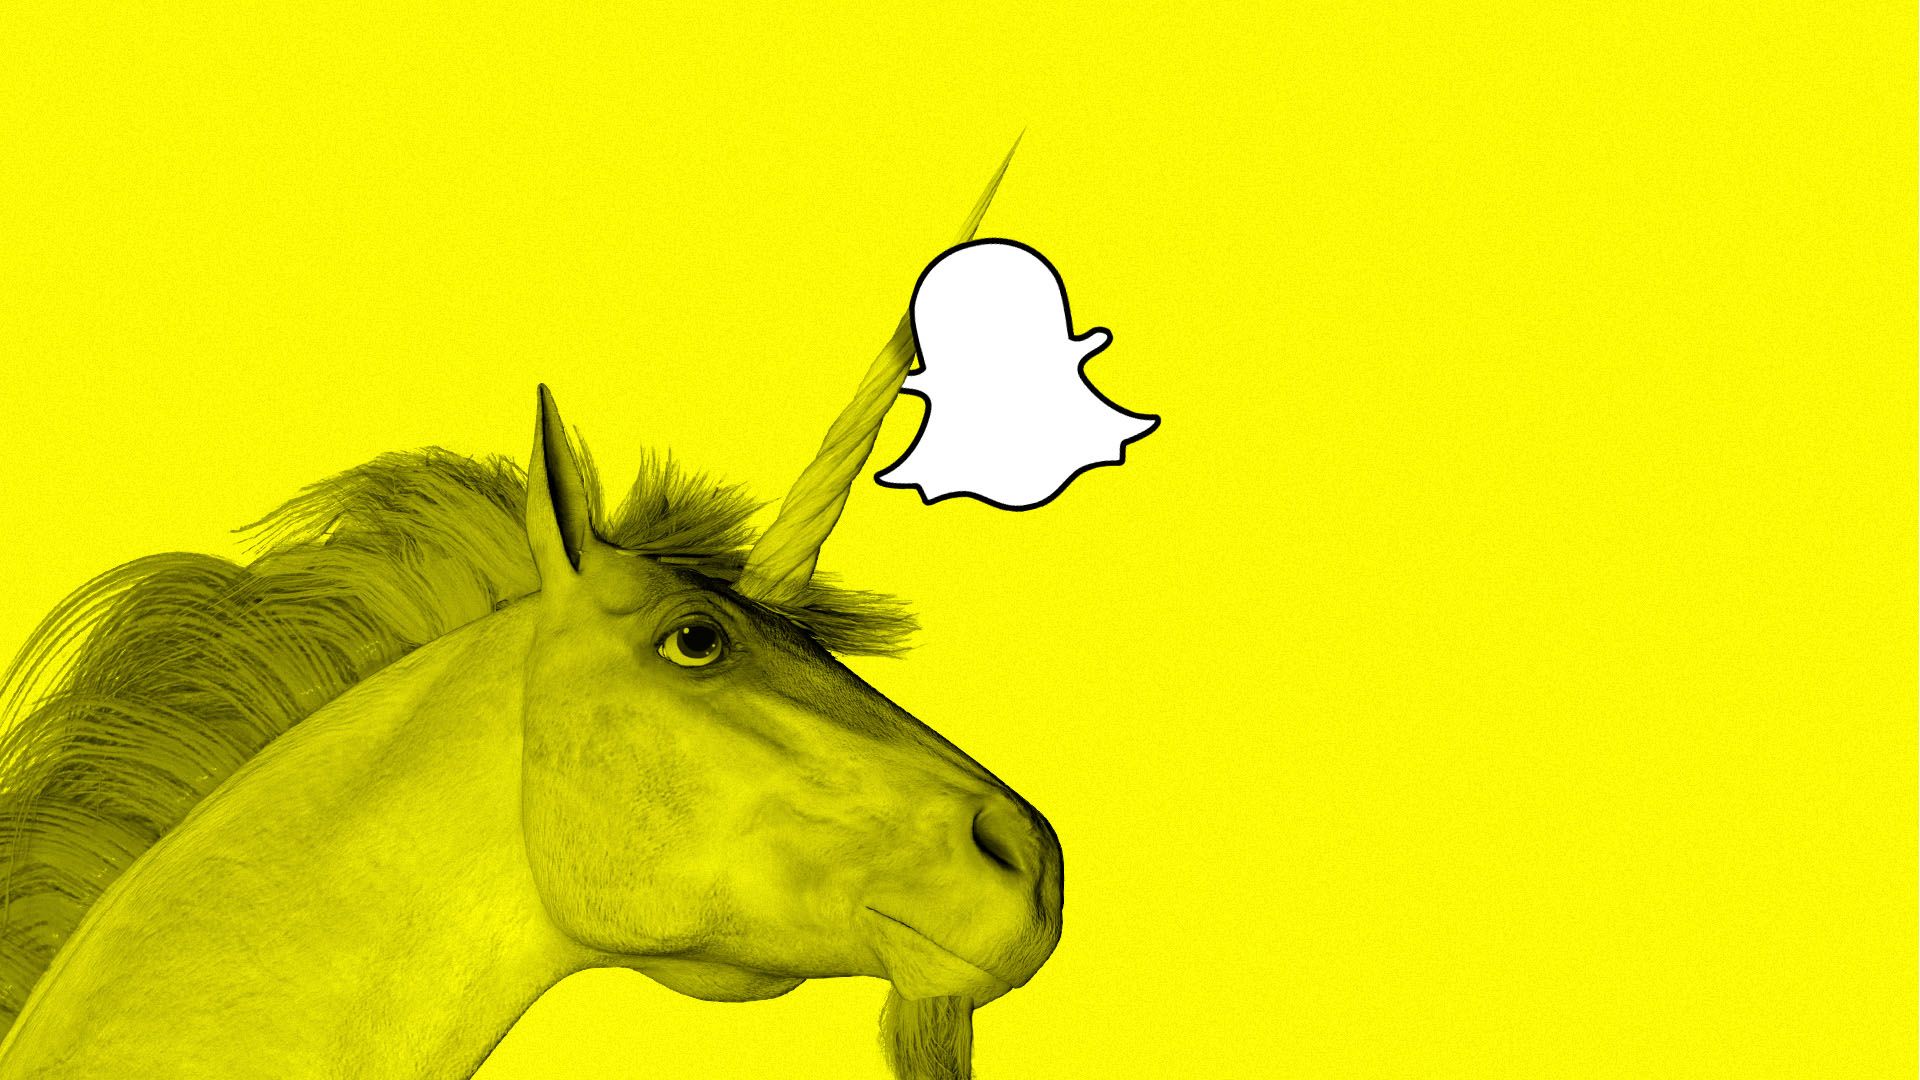 Illustration of a unicorn with the Snapchat ghost logo on it's horn.